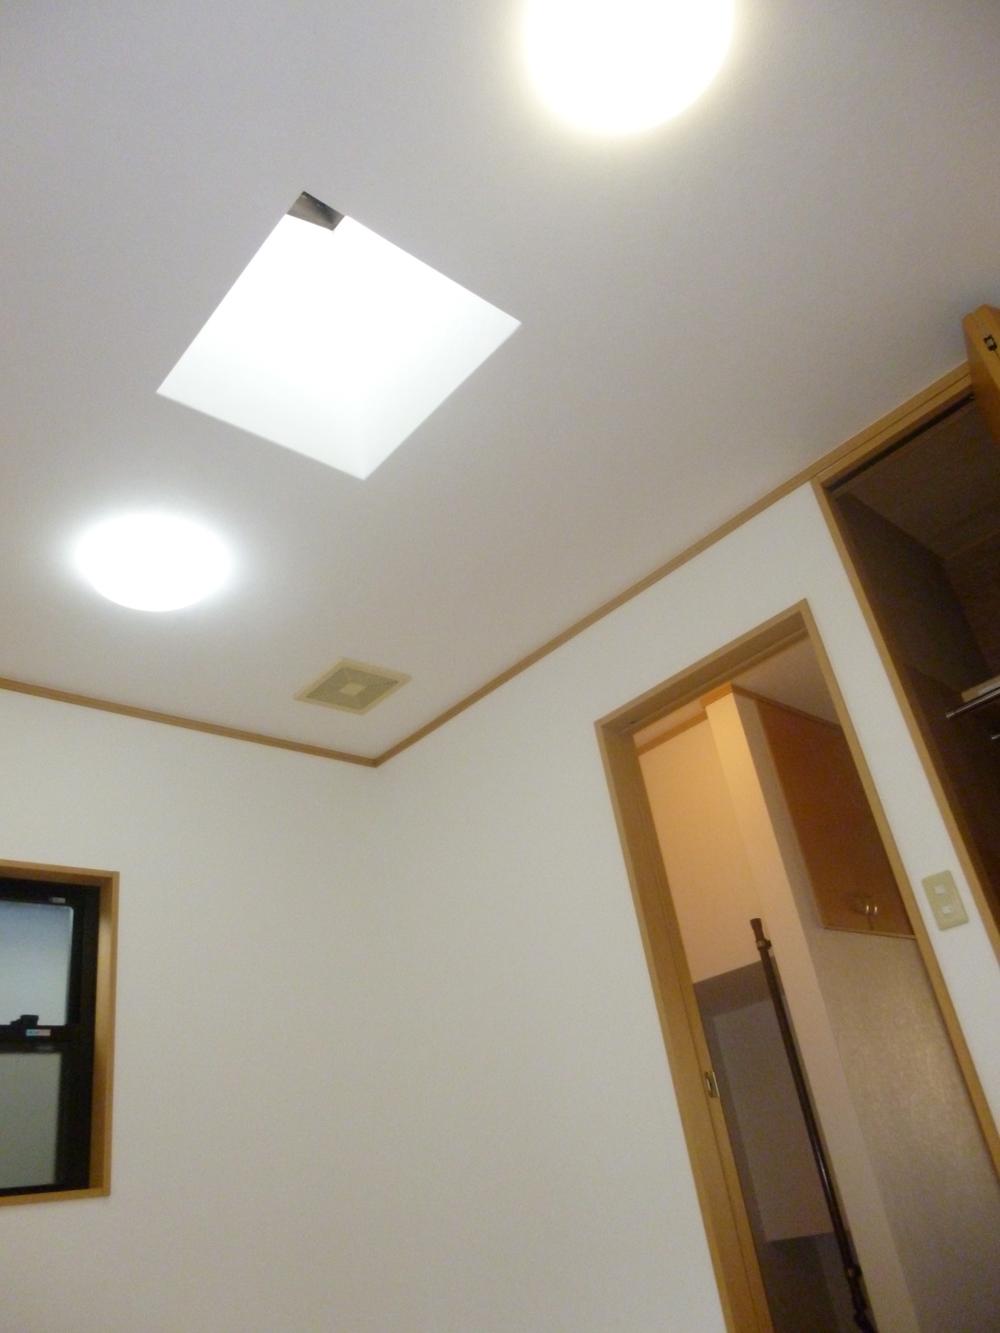 Non-living room. Equipped skylight rooms and ventilation fan also